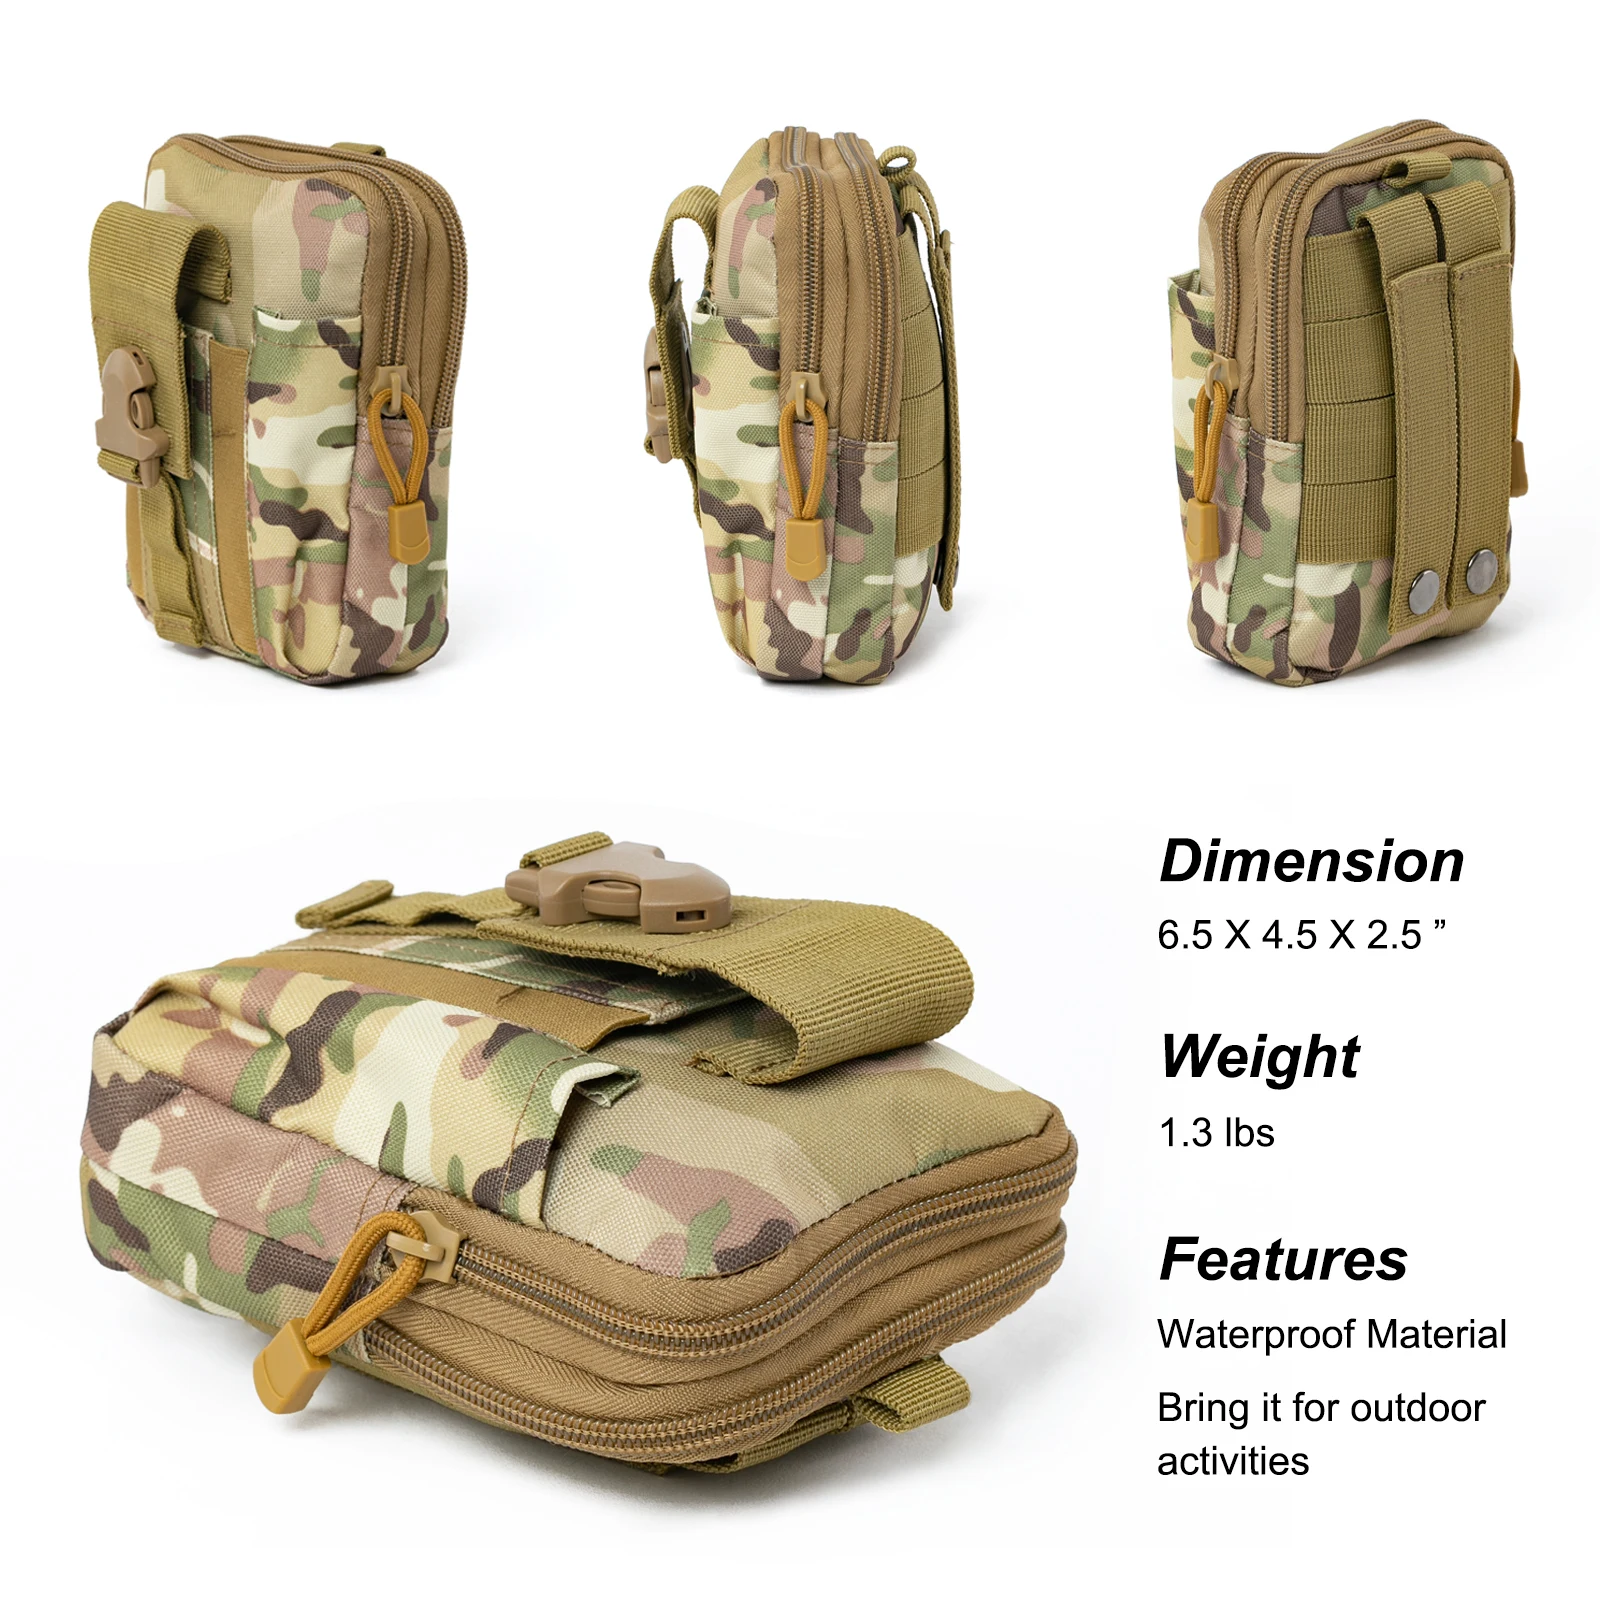 Emergency Survival Kit, First Aid Kit Professional Survival Gear Tool with IFAK Molle System Compatible Bag, Gift